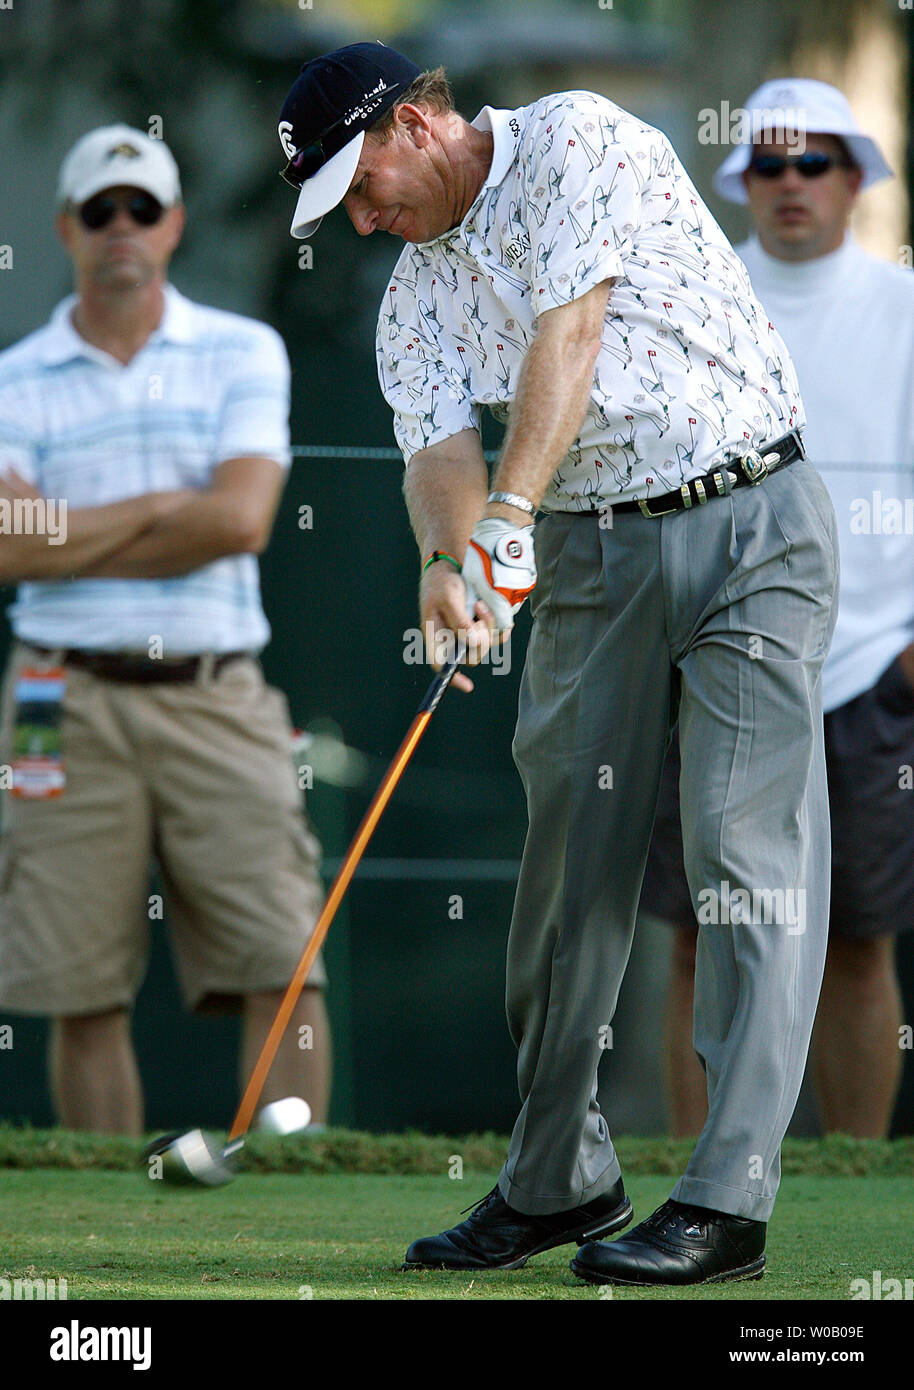 Woody Austin hits his drive on the fourth hole in the second  round of the 89th PGA Championship at Southern Hills Country Club in Tulsa, Oklahoma on August 9, 2007.   Austin is among the early leaders on day two of the PGA Championship. (UPI Photo/Gary C. Caskey) Stock Photo